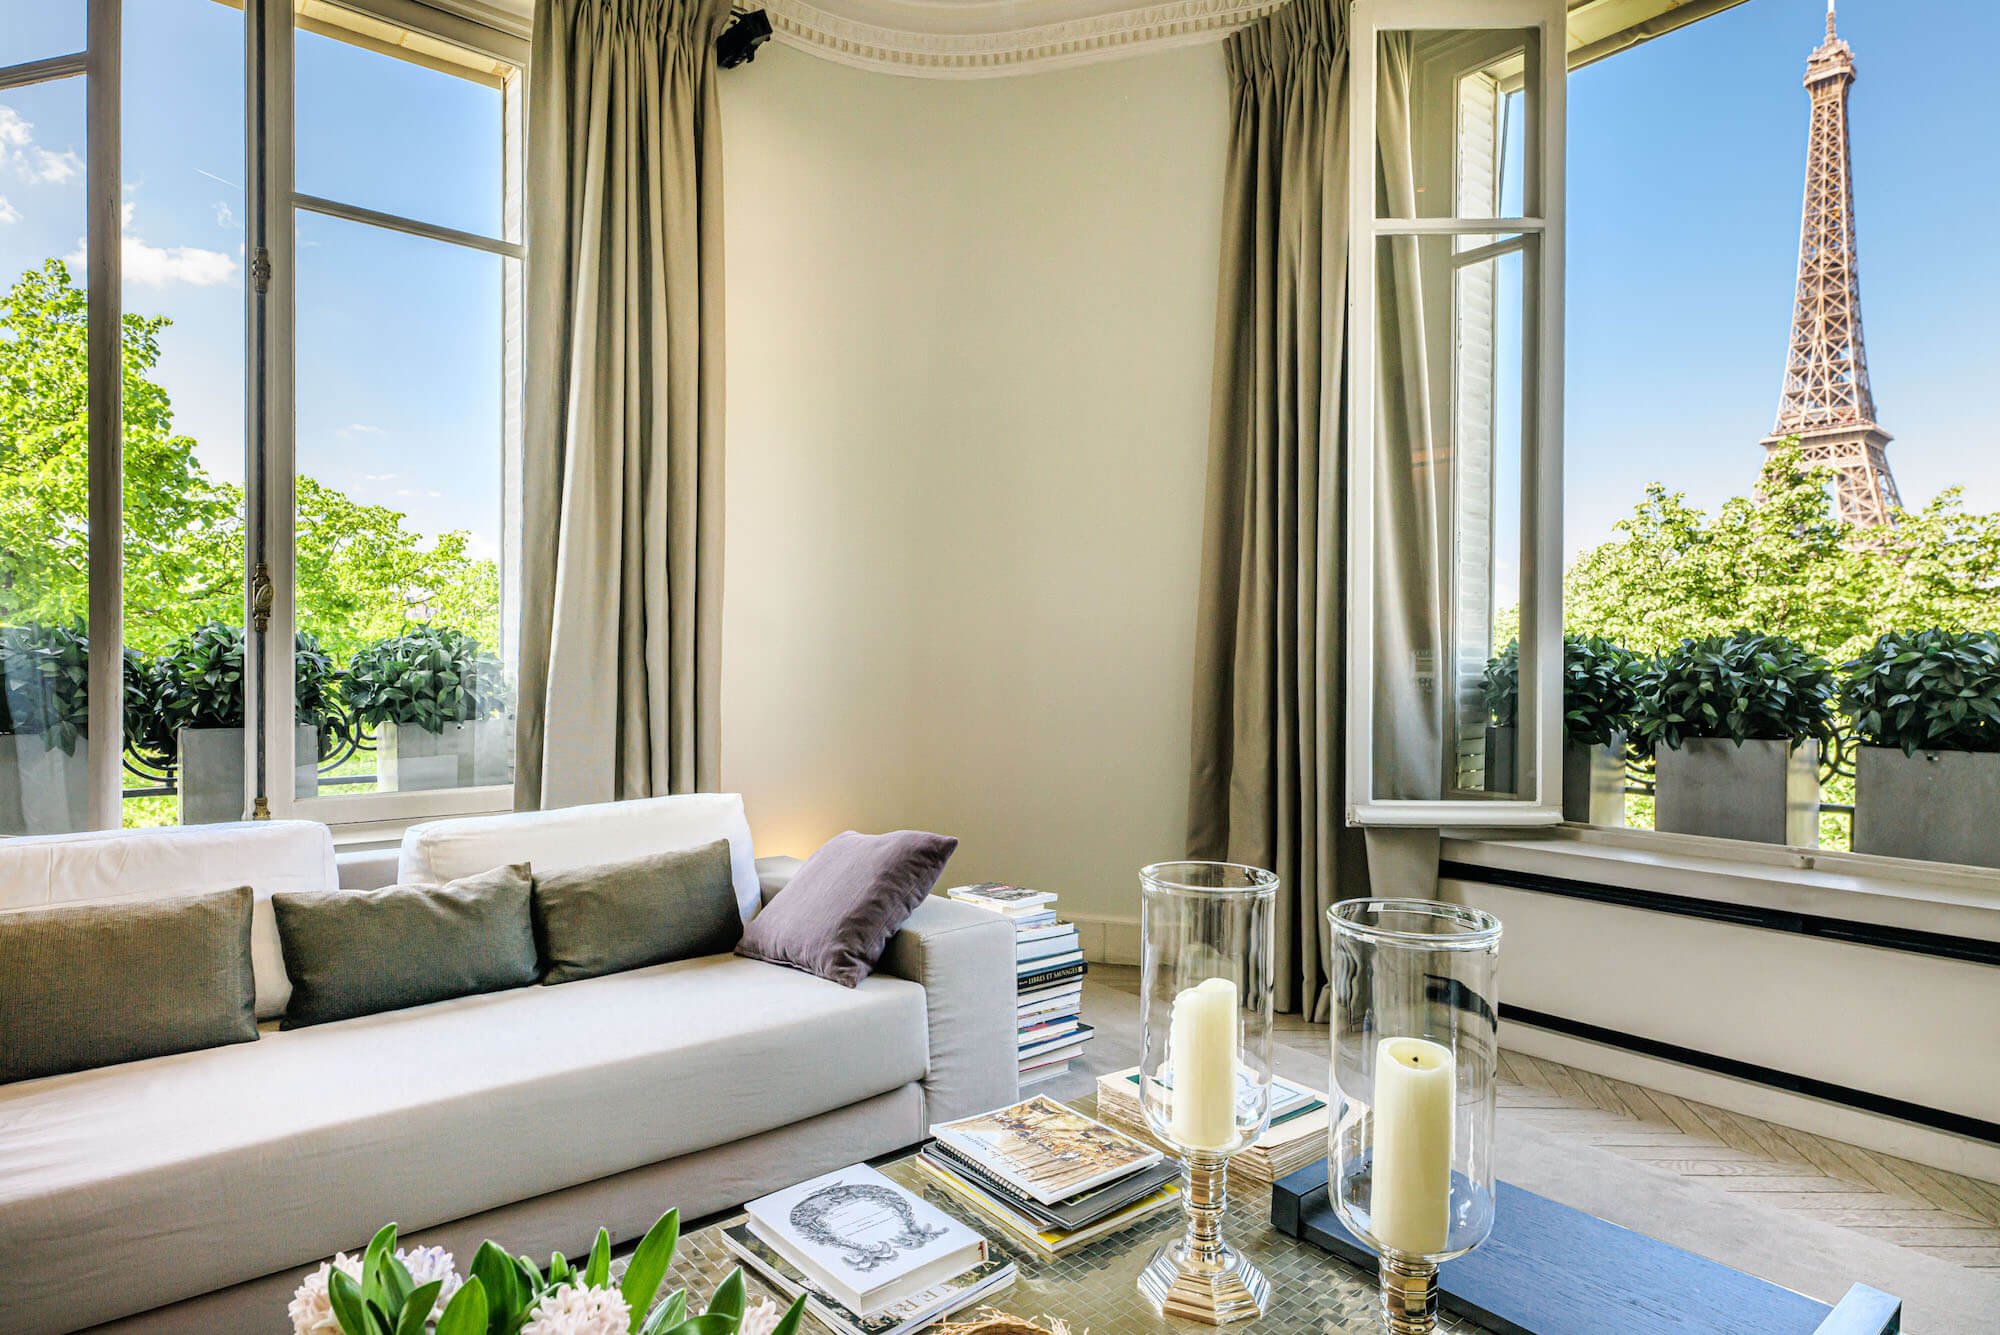 Luxury apartment in the heart of Paris with a view of the Eiffel Tower